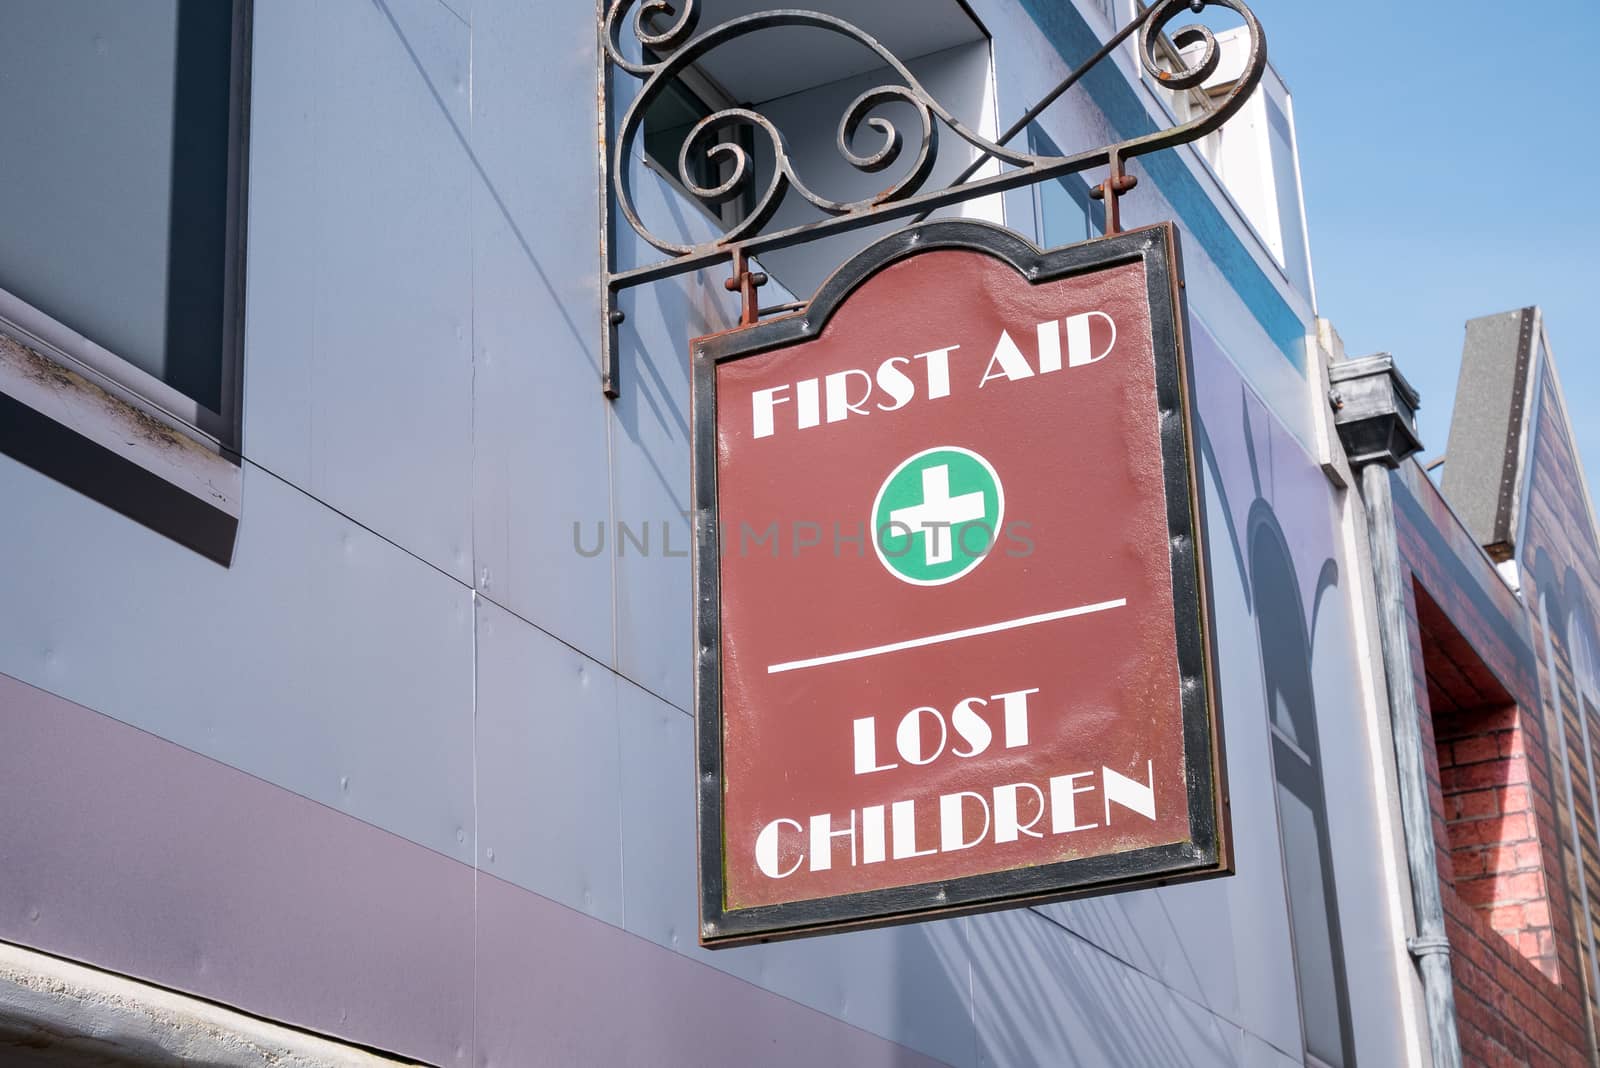 First aid and lost children office by Alicephoto